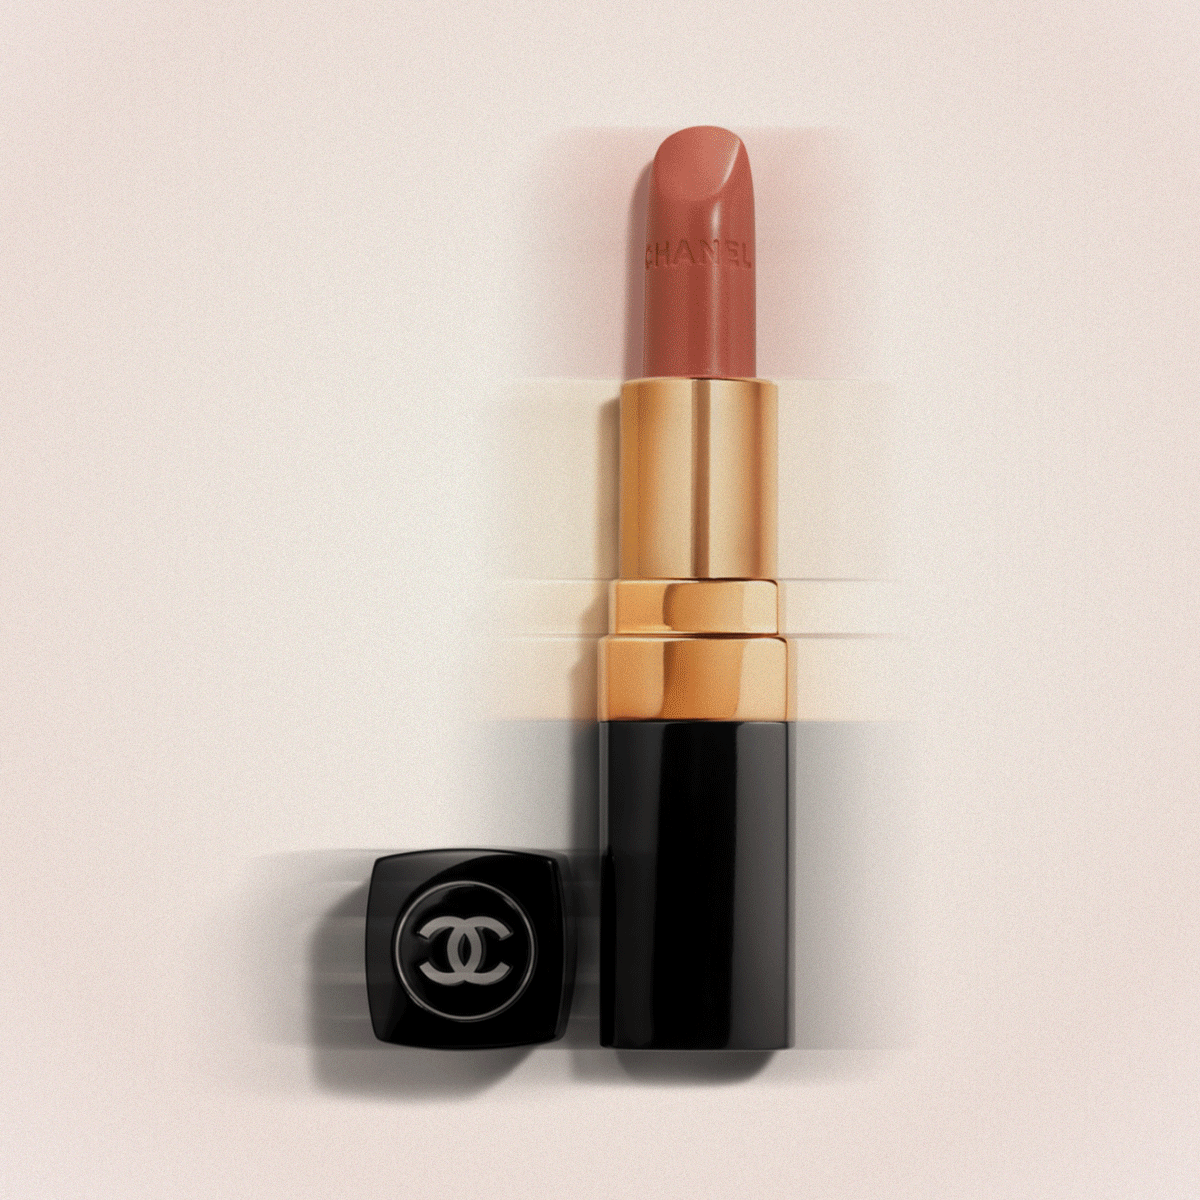 best-chanel-makeup-products-296413-1637276223204-square